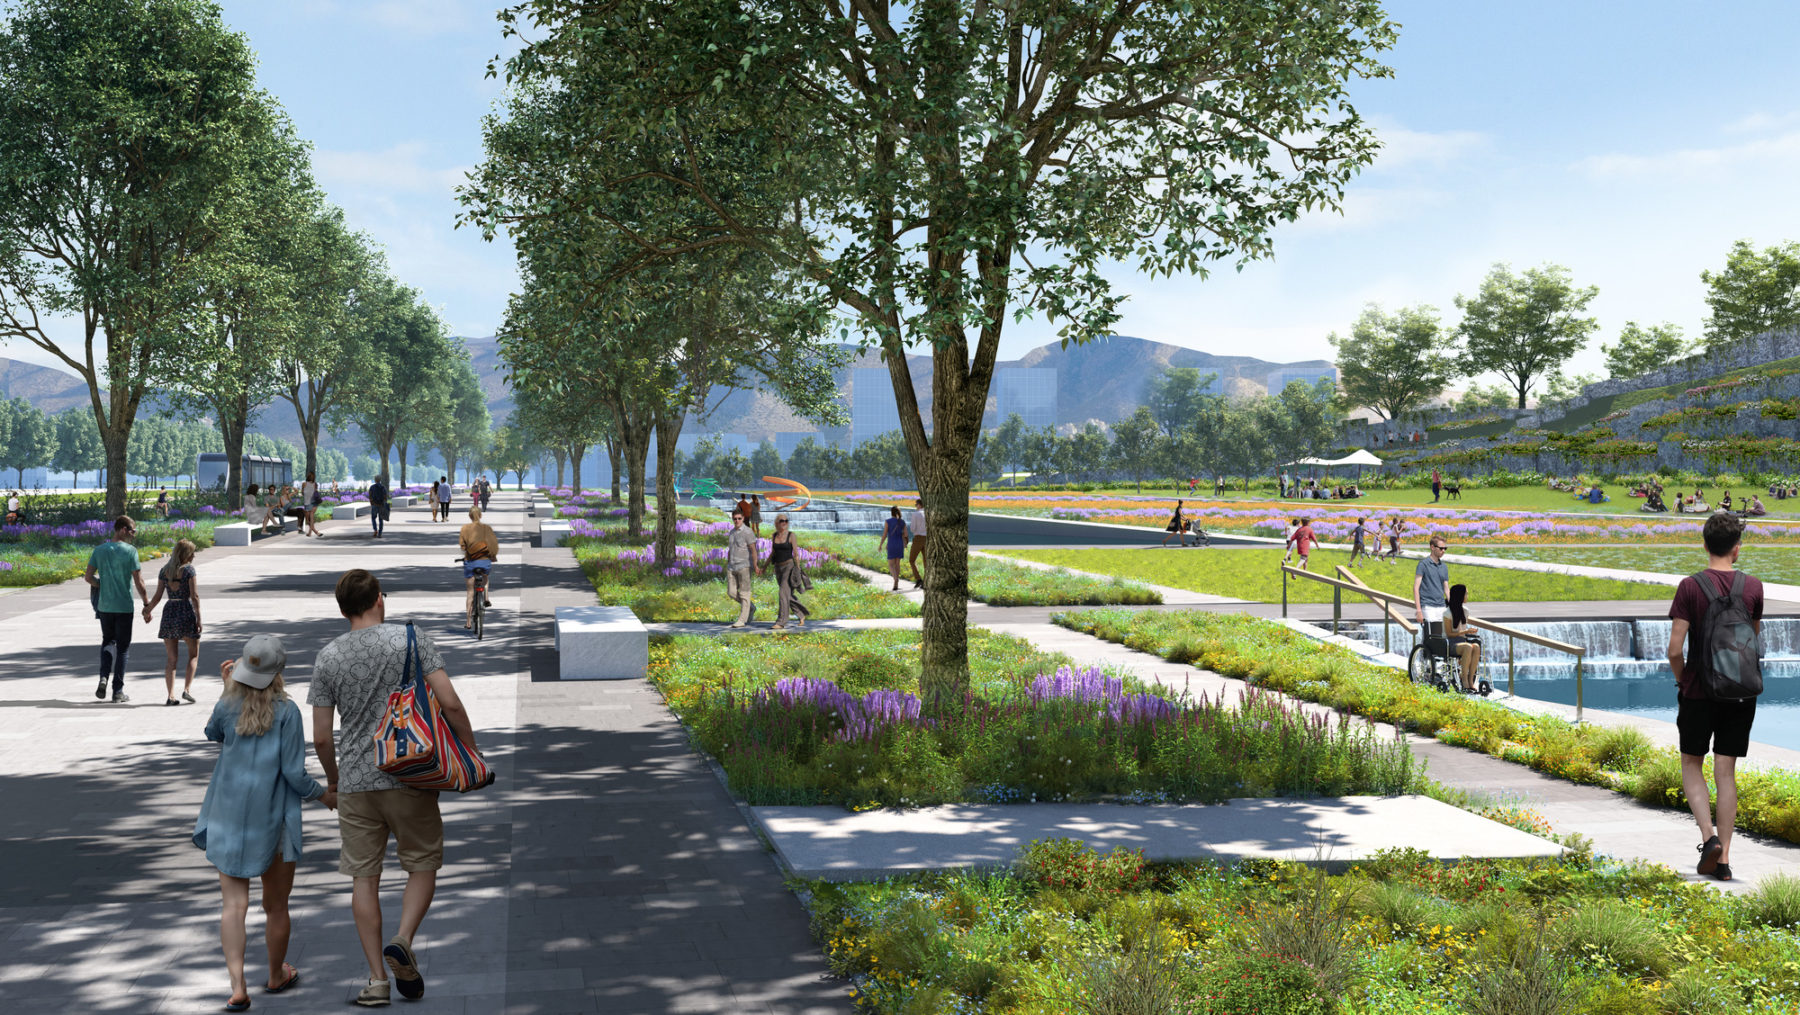 Rendering of main pedestrian axis with groups of people walking along it. Trees line the axis.